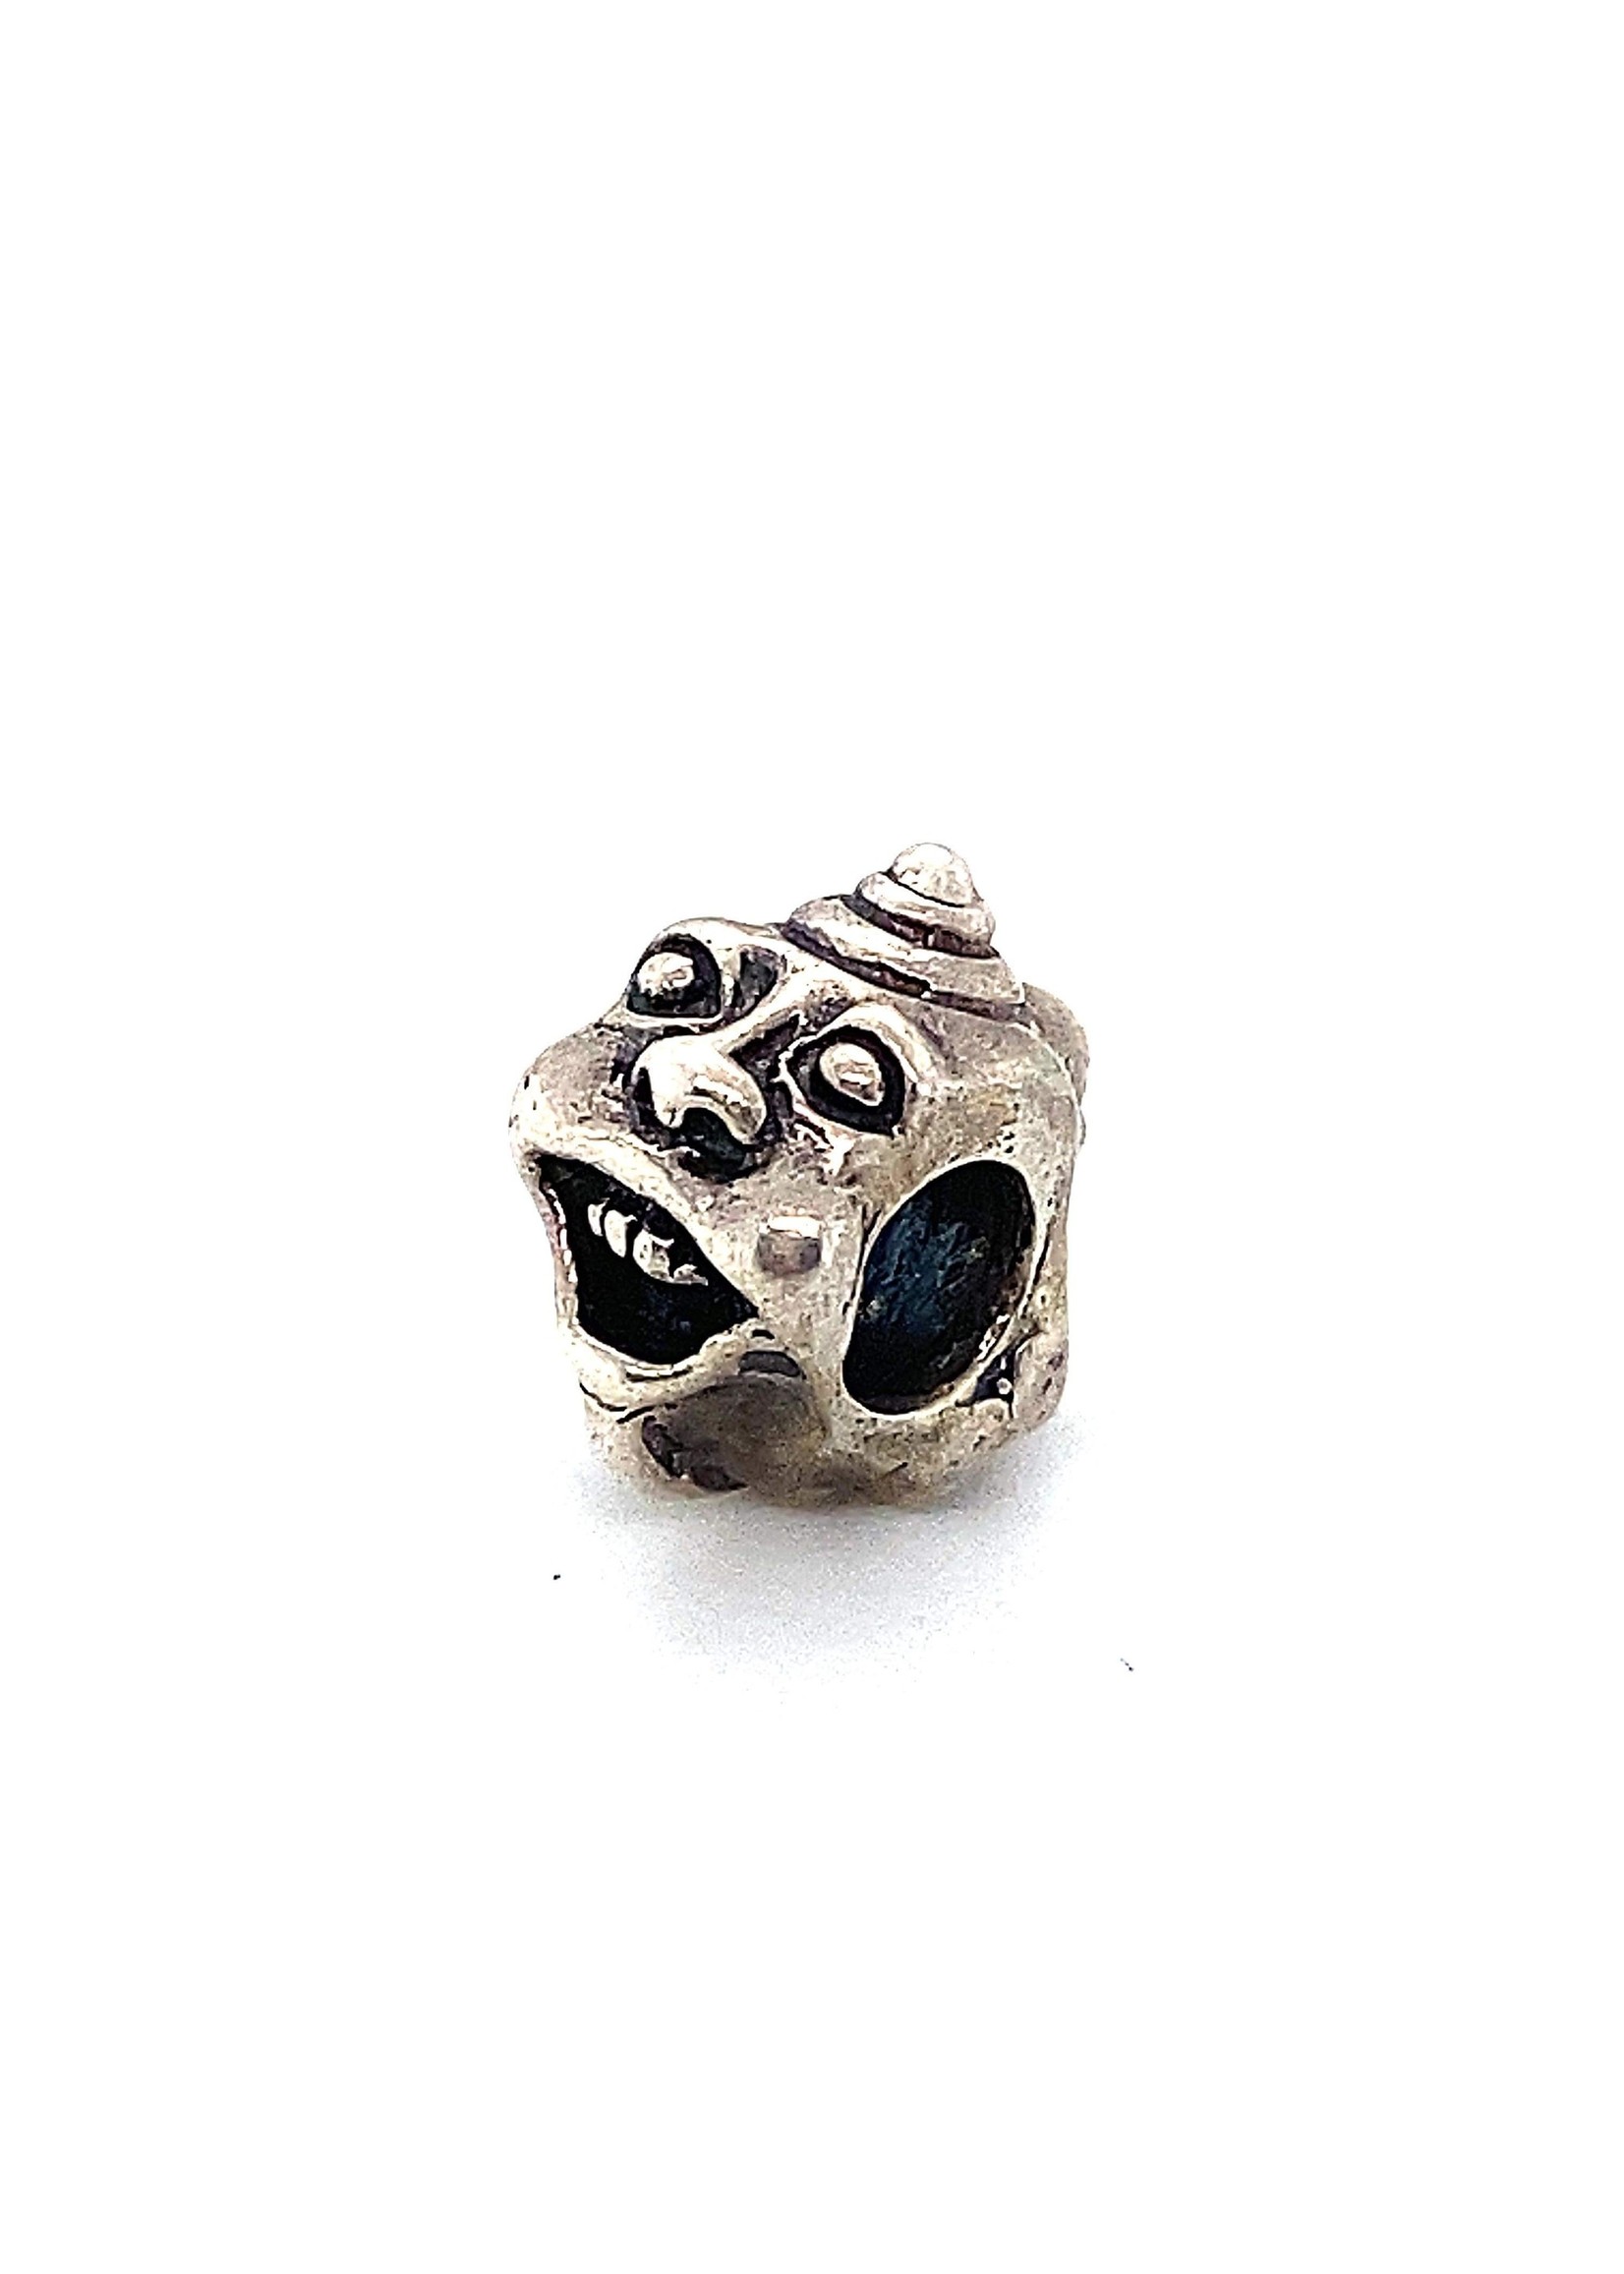 Vintage & Occasion trollbeads retired two face